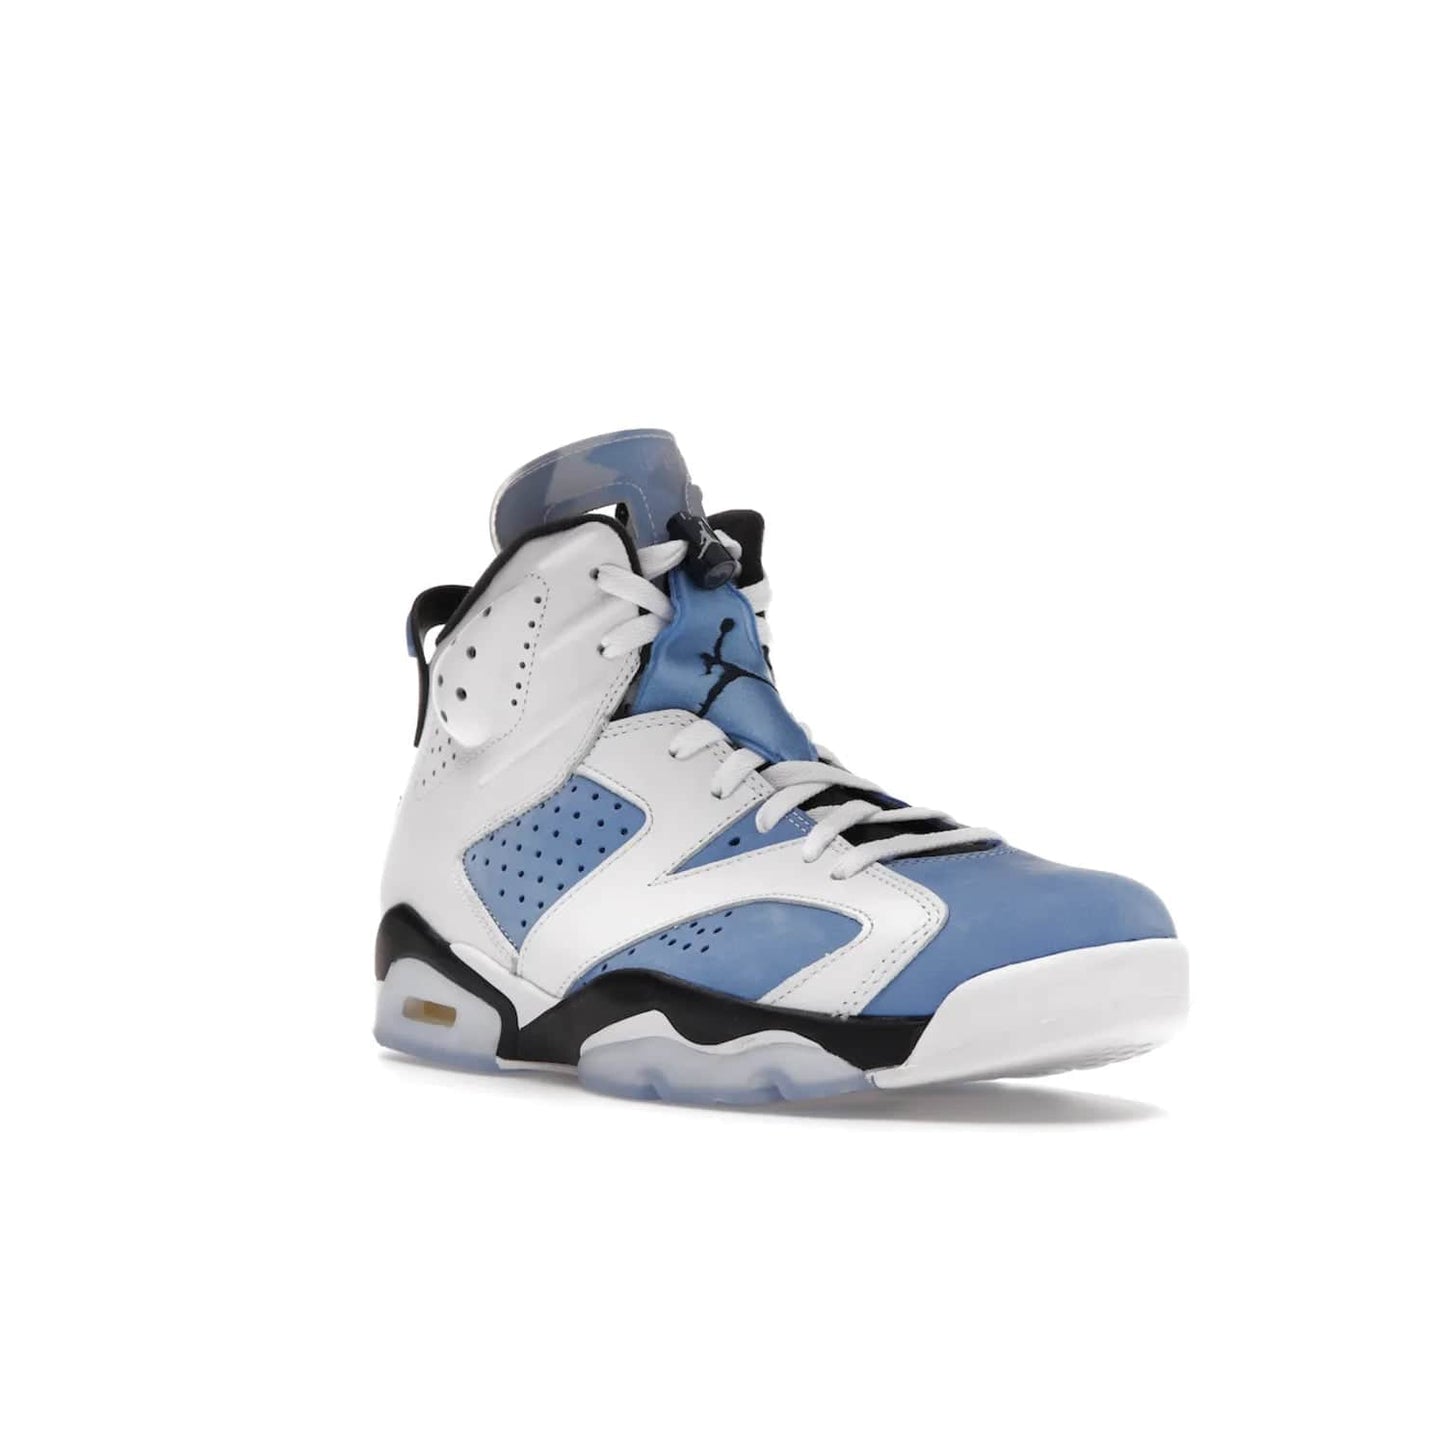 Jordan 6 Retro UNC White - Image 6 - Only at www.BallersClubKickz.com - Air Jordan 6 Retro UNC White with classic UNC colors brings nostalgia and style to a legendary silhouette. Celebrate MJ's alma mater with navy blue accents, icy semi-translucent sole and Jordan Team patch. Out March 2022 for the Sneaker Enthusiast.